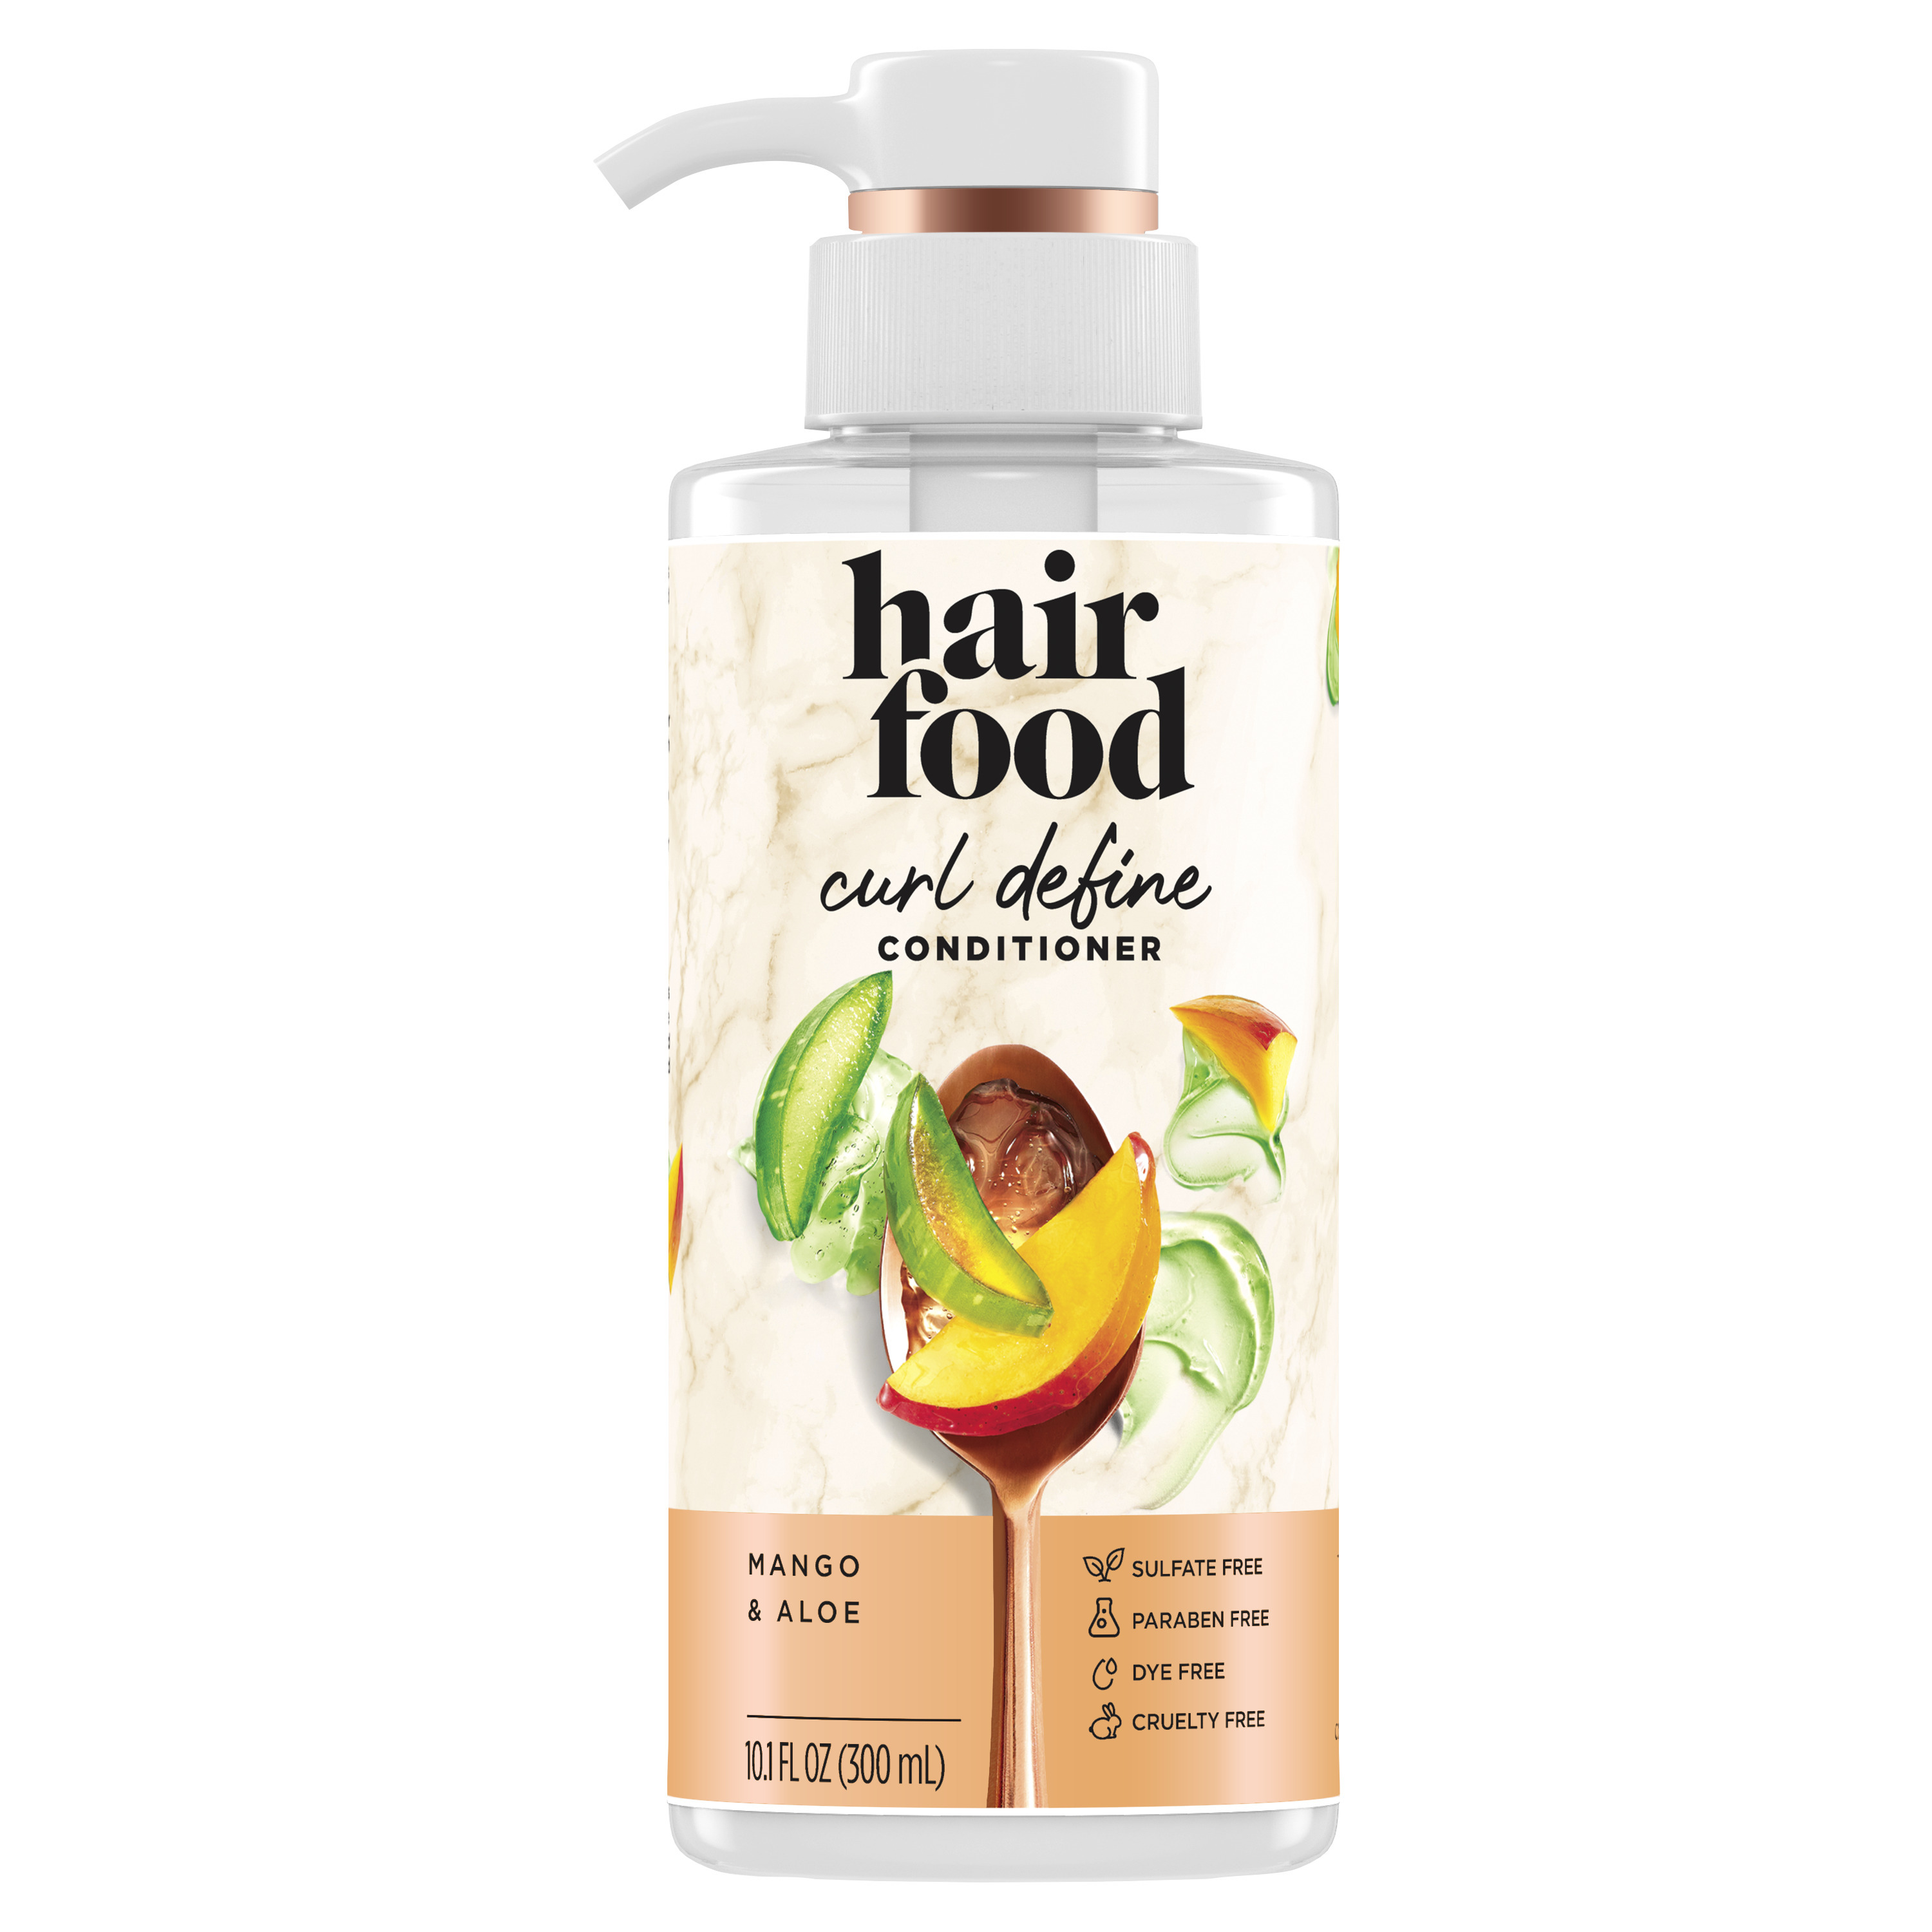 Hair Food Mango & Aloe Curl Definition Conditioner, for Curly Hair, 10.1 fl oz - image 1 of 11